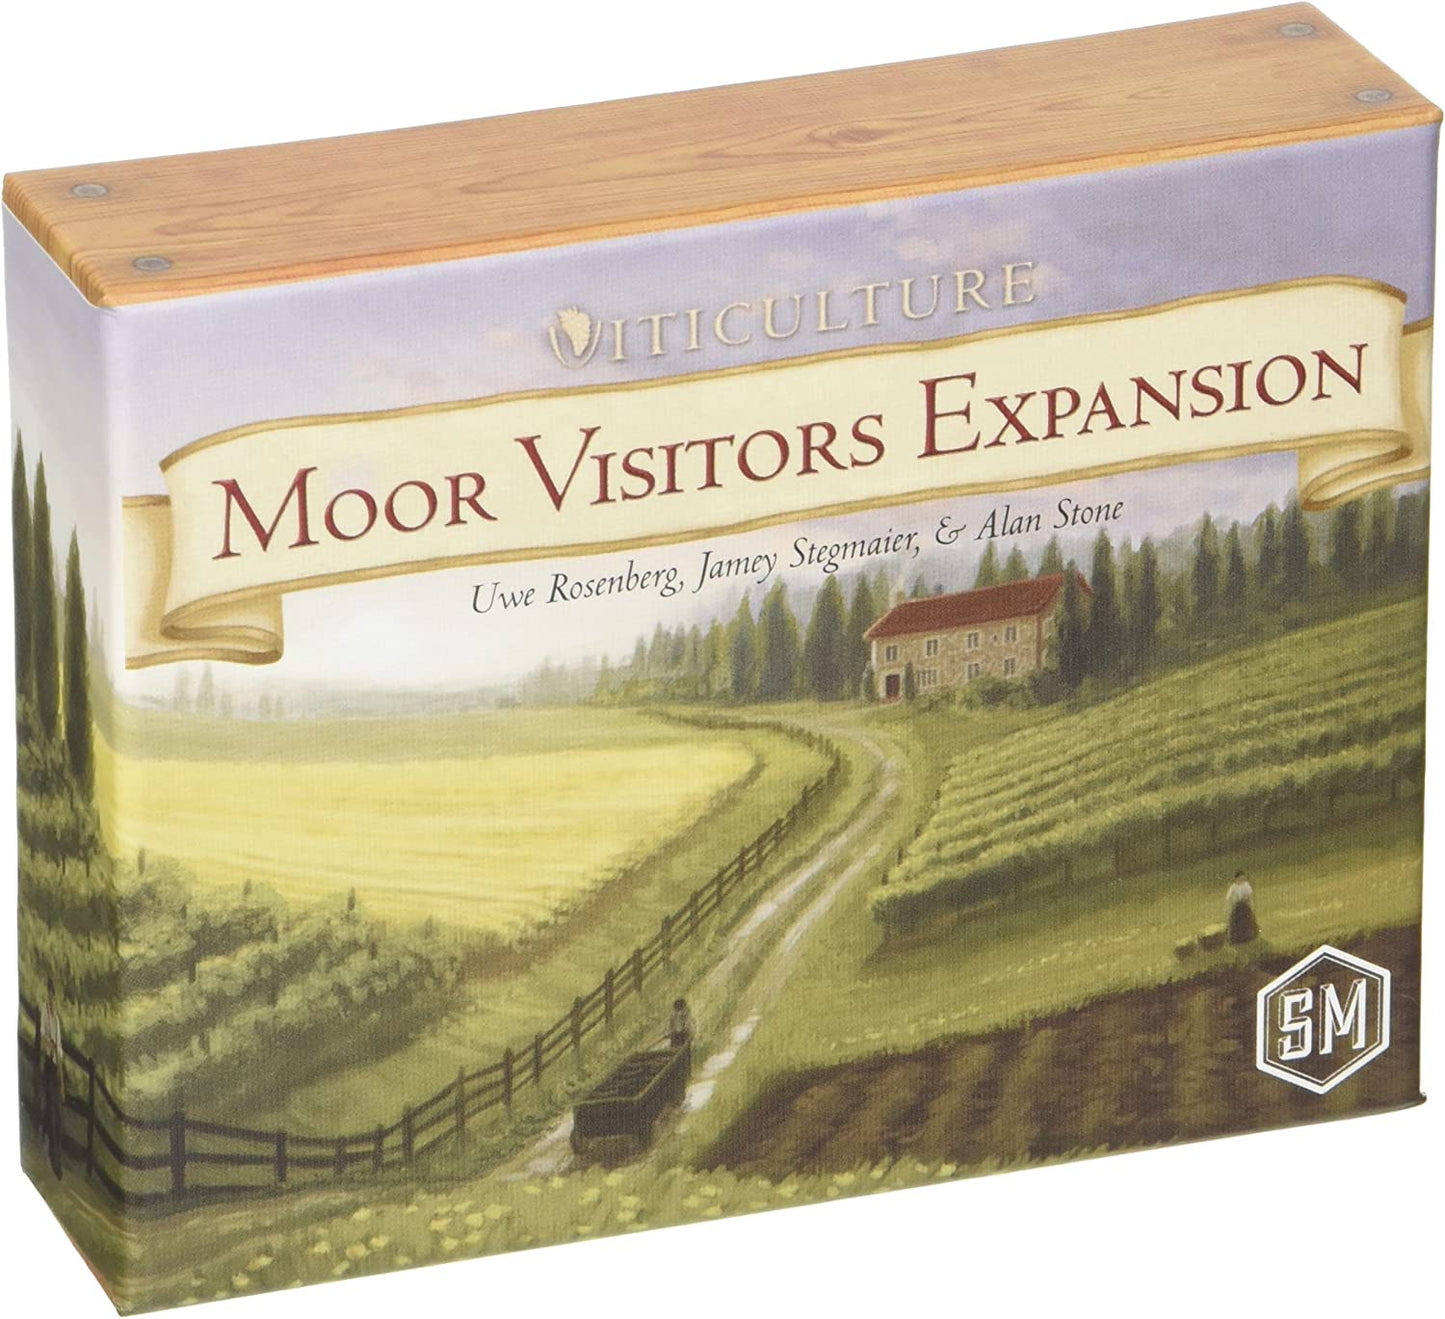 Viticulture: Moor Visitors Expansion StoneMaier